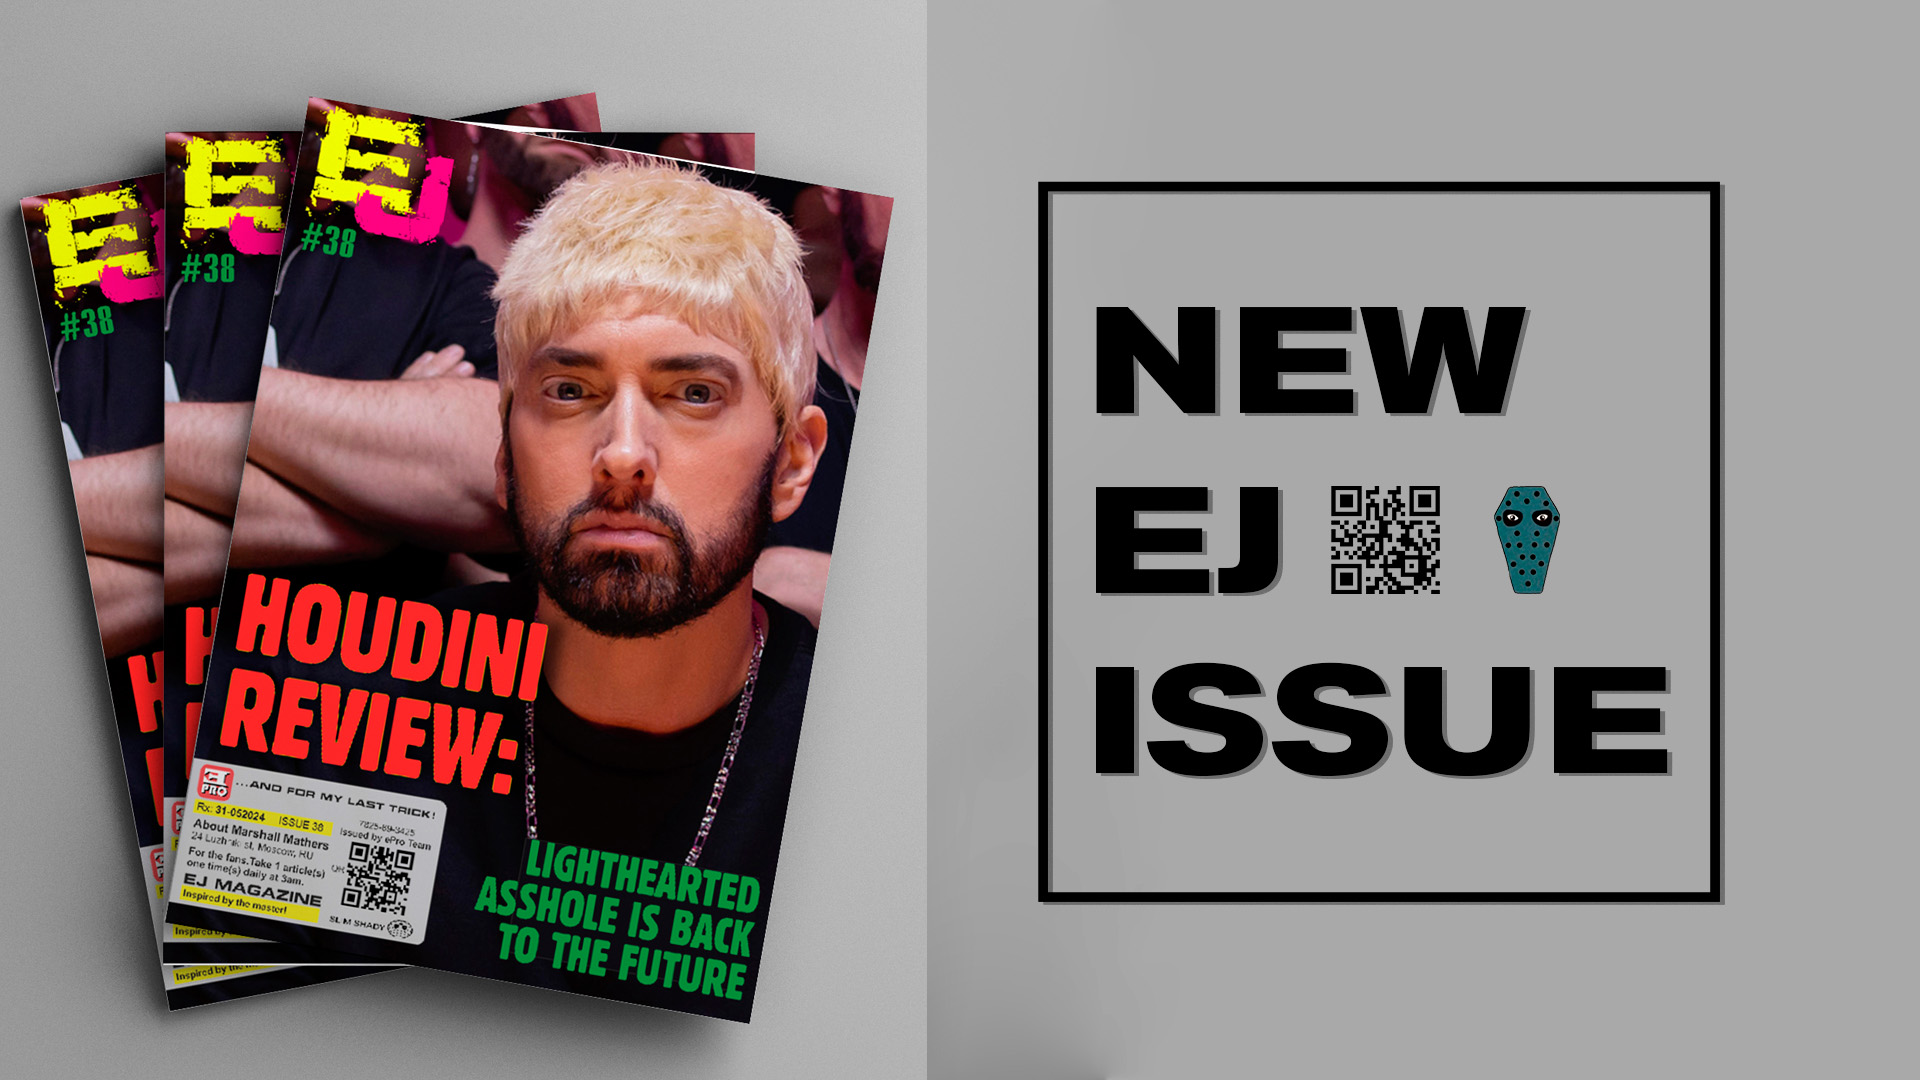 EJ Magazine #38 Available Now